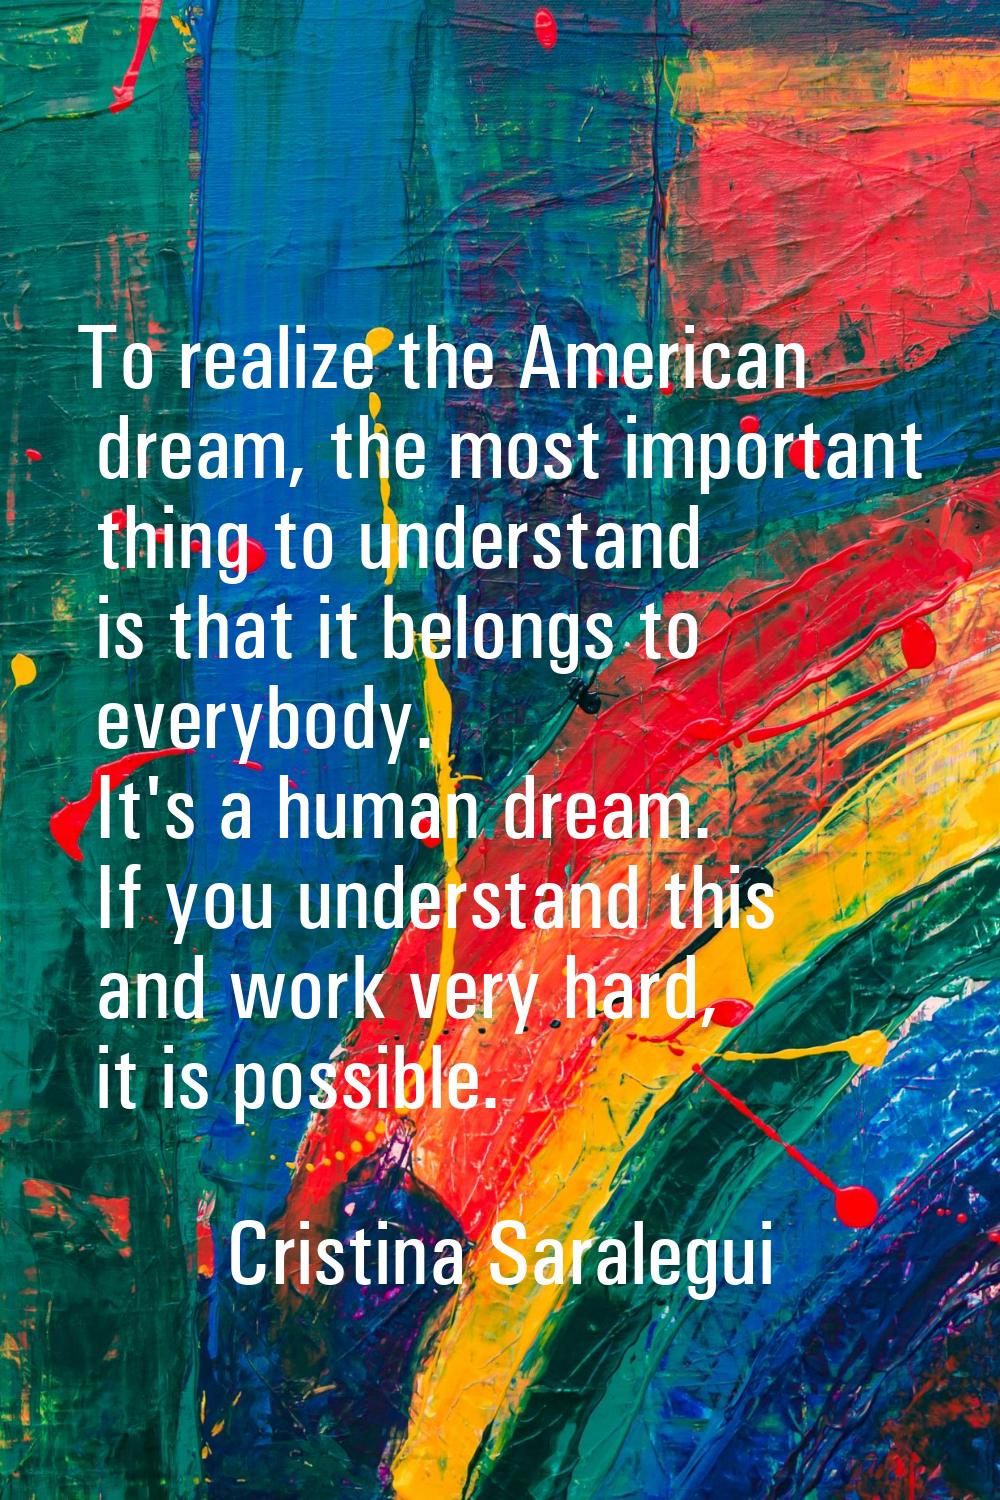 To realize the American dream, the most important thing to understand is that it belongs to everybo